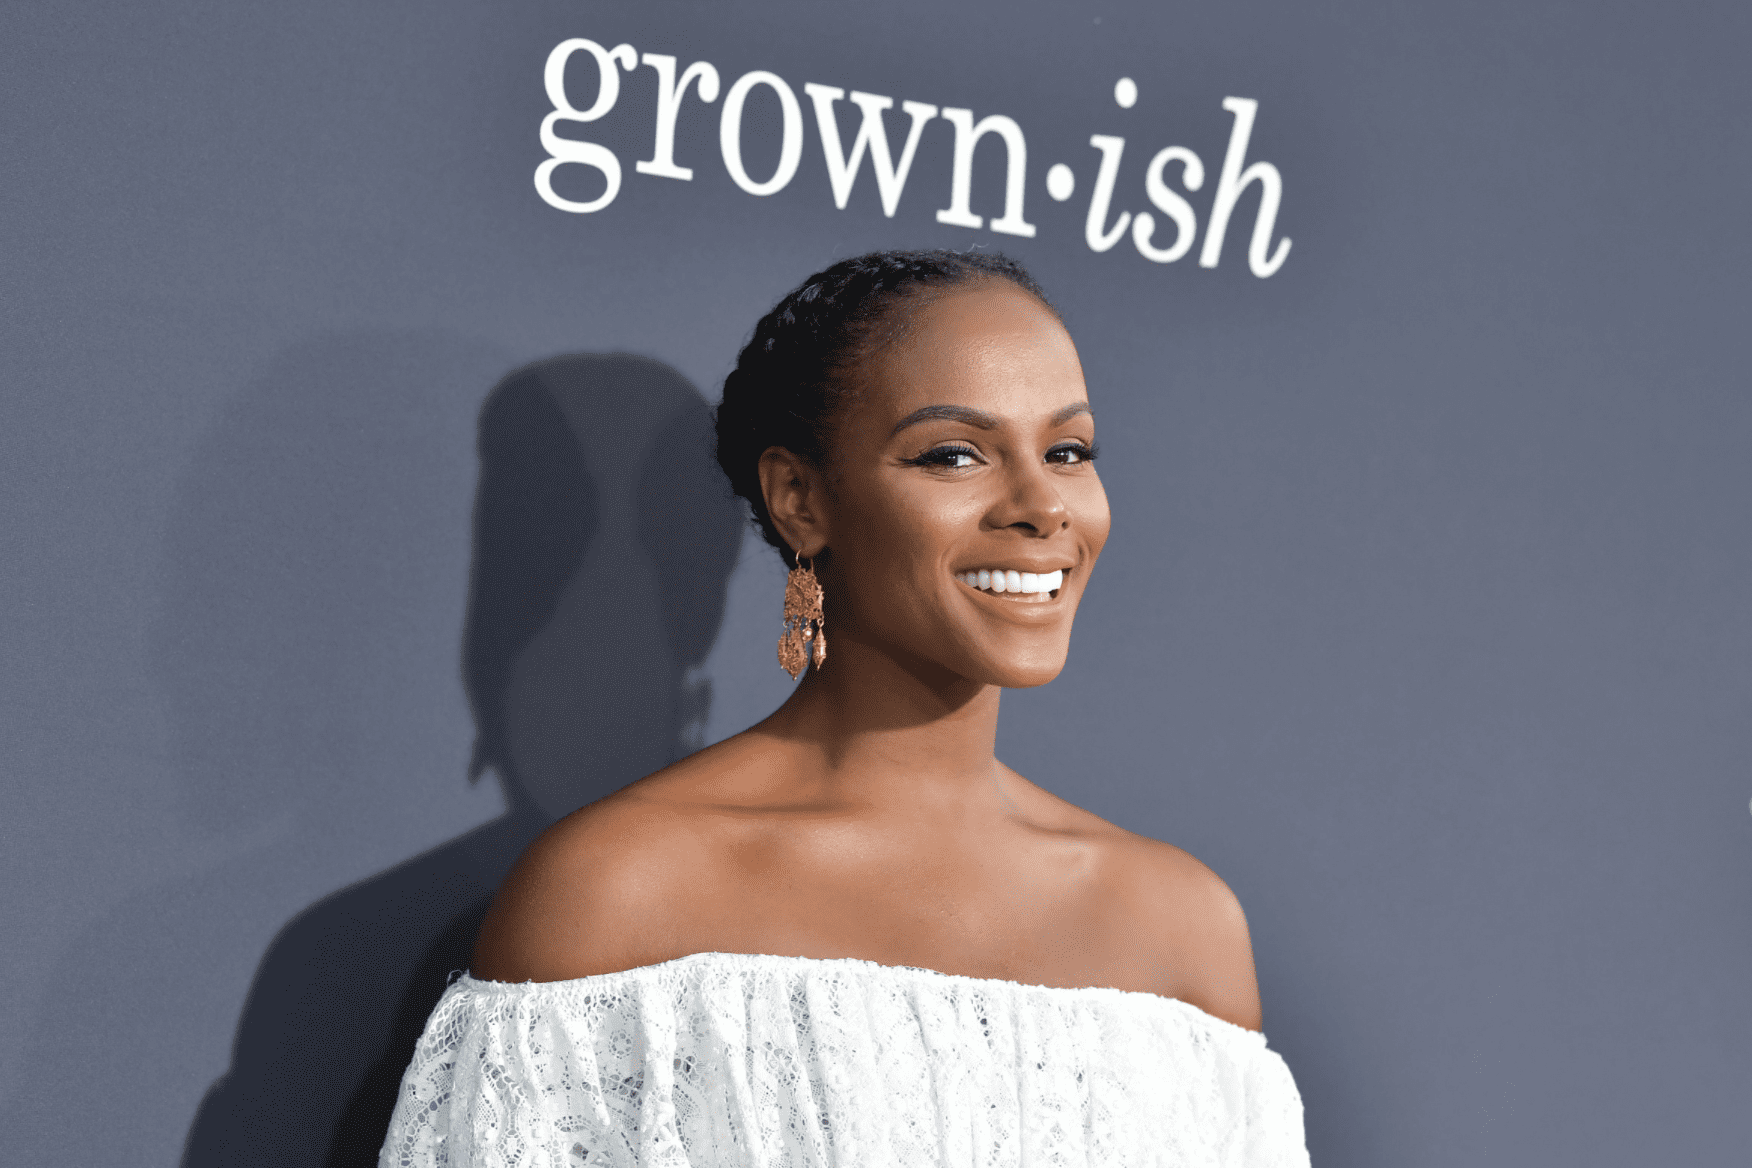 Tika Sumpter at POPSUGAR X ABC's "Embrace Your Ish" Event at Goya Studios on September 17, 2019 in Los Angeles, California. | Source: Getty Images